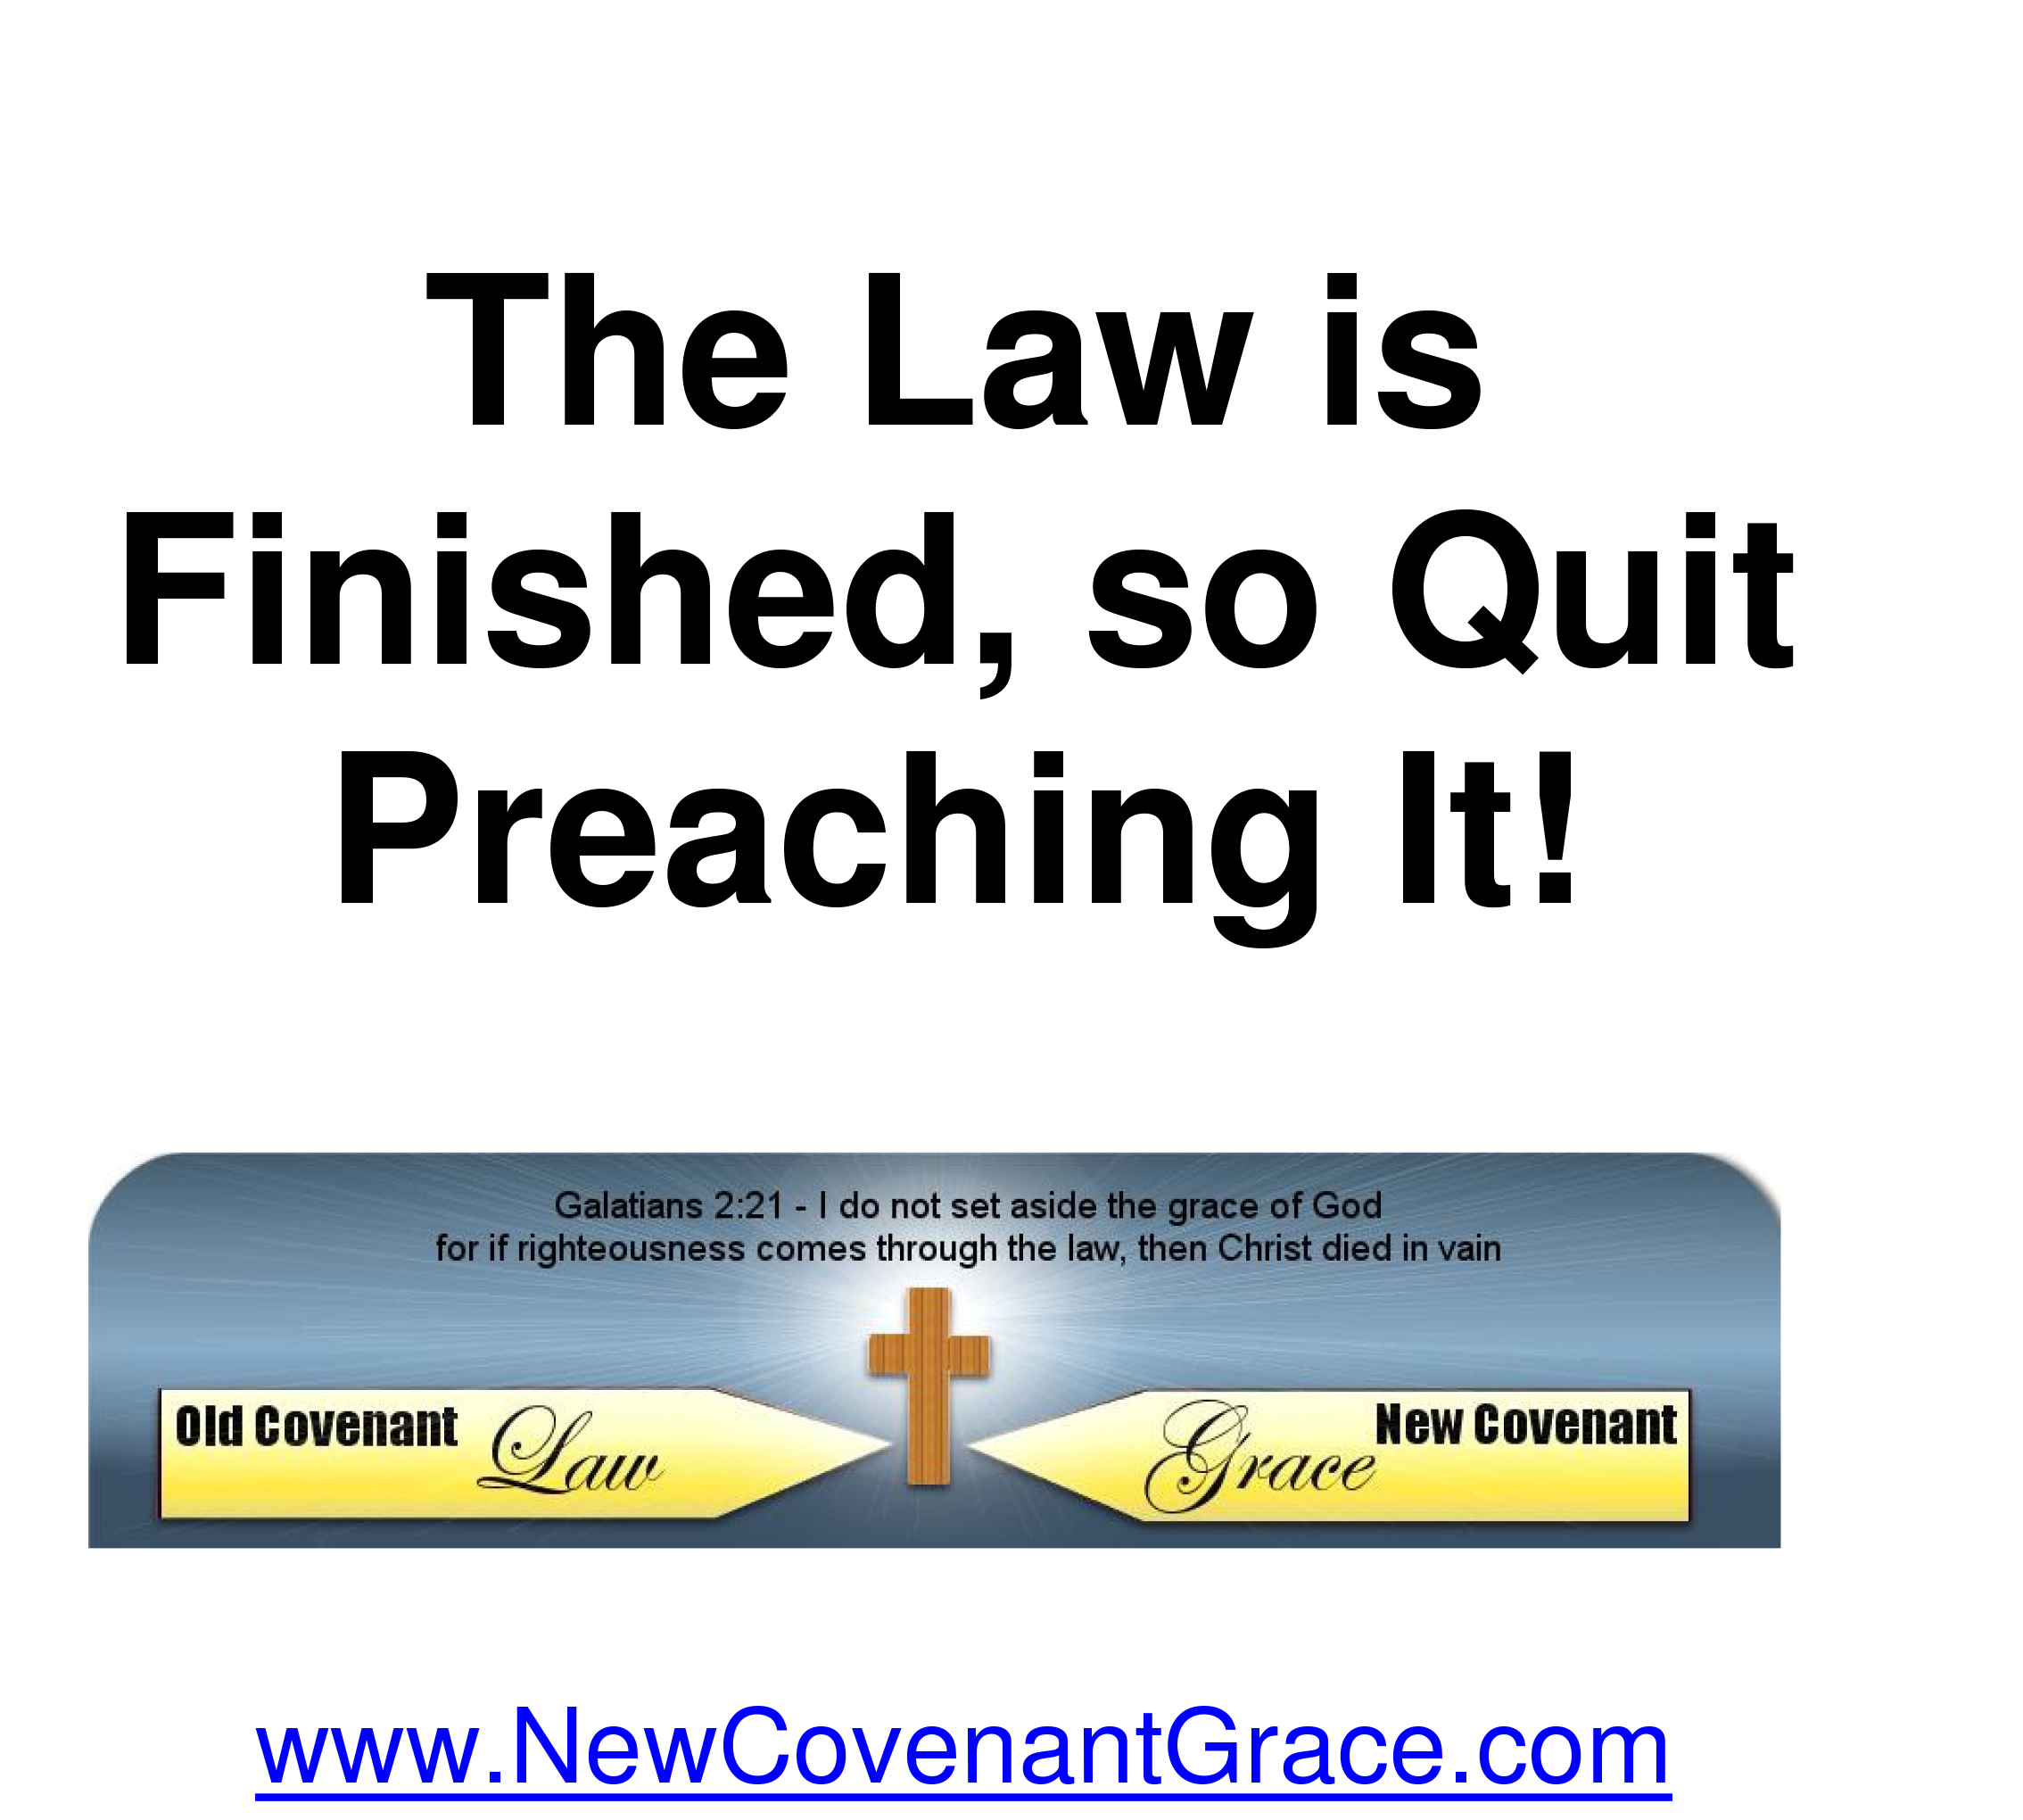 The Law is finished, So Quit Preaching It!